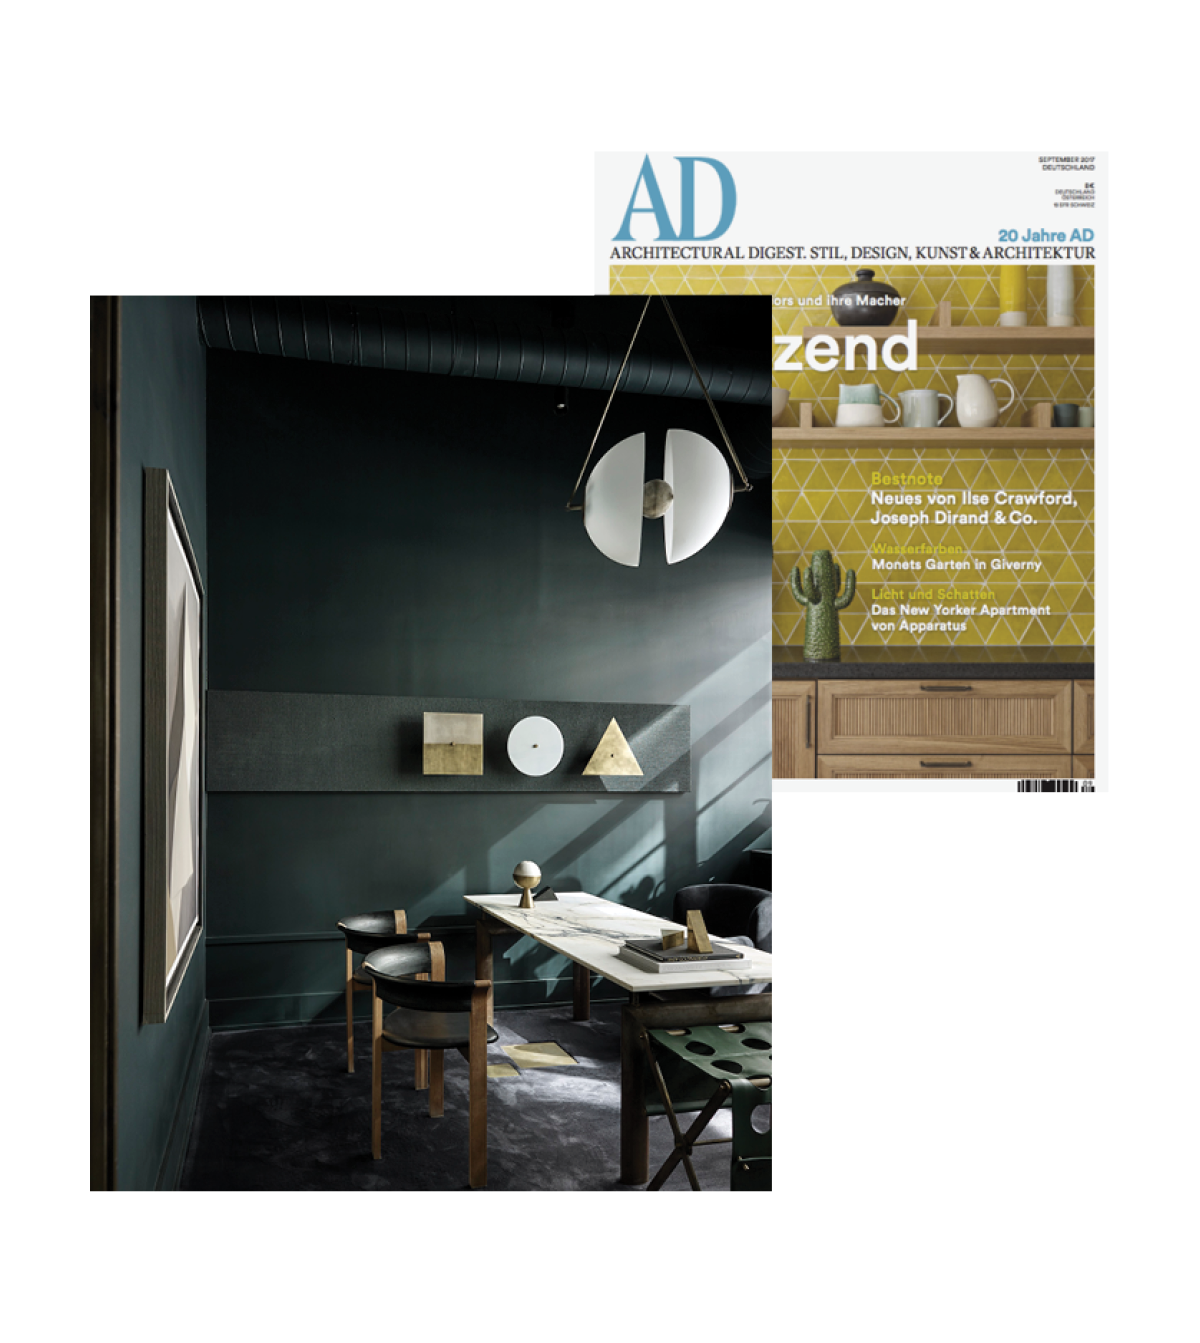 ARCHITECTURAL DIGEST GERMANY